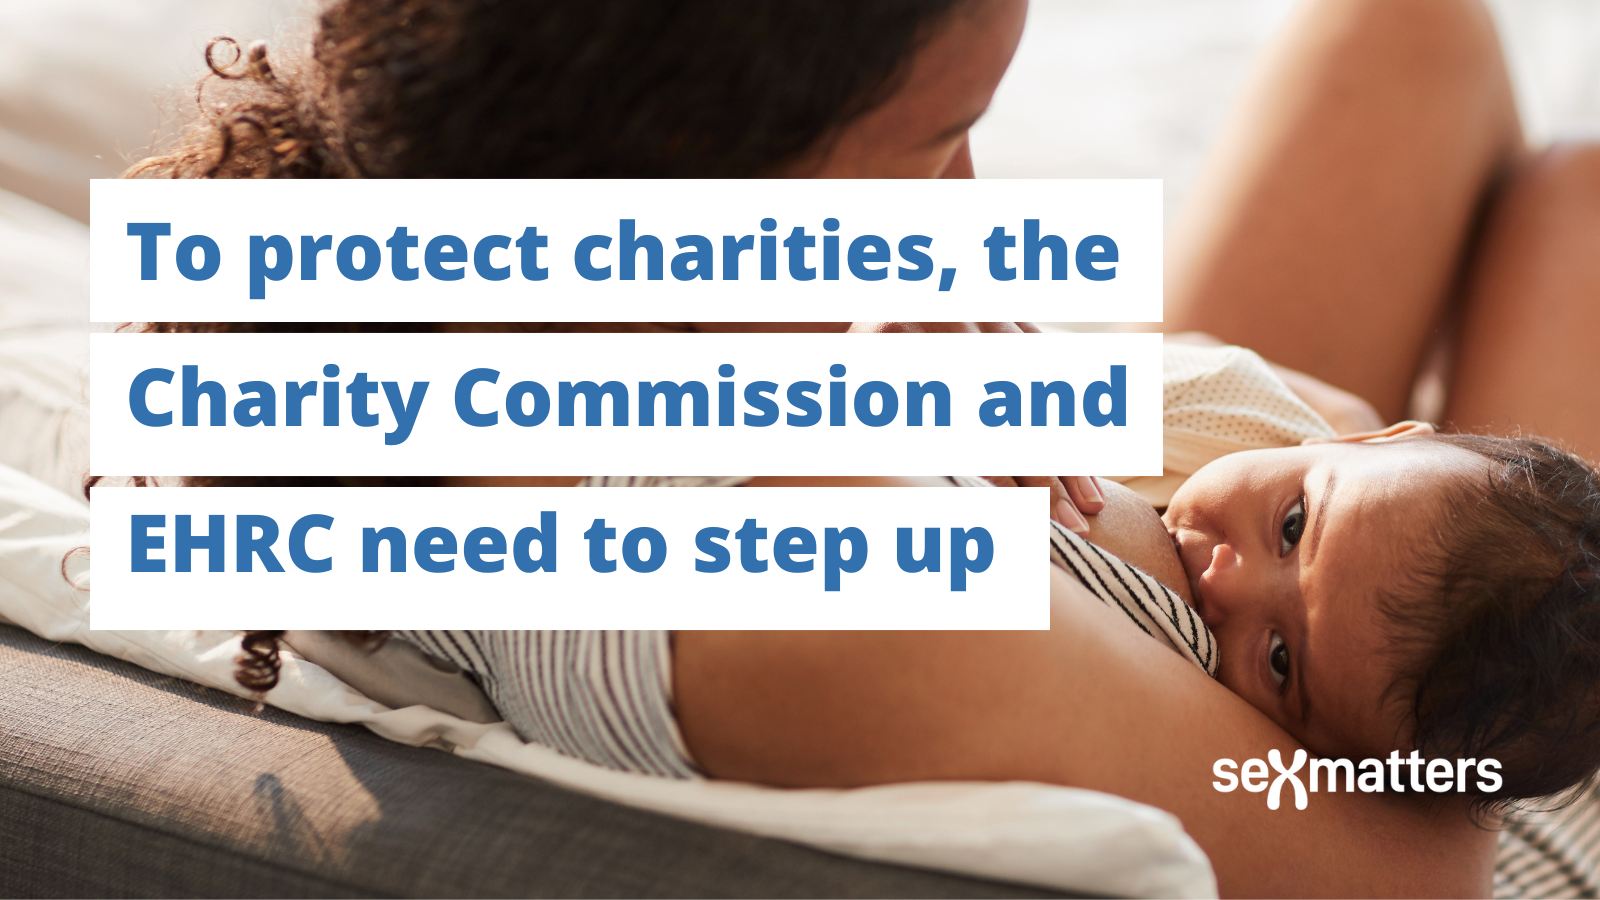 To protect charities, the Charity Commission and EHRC need to step up